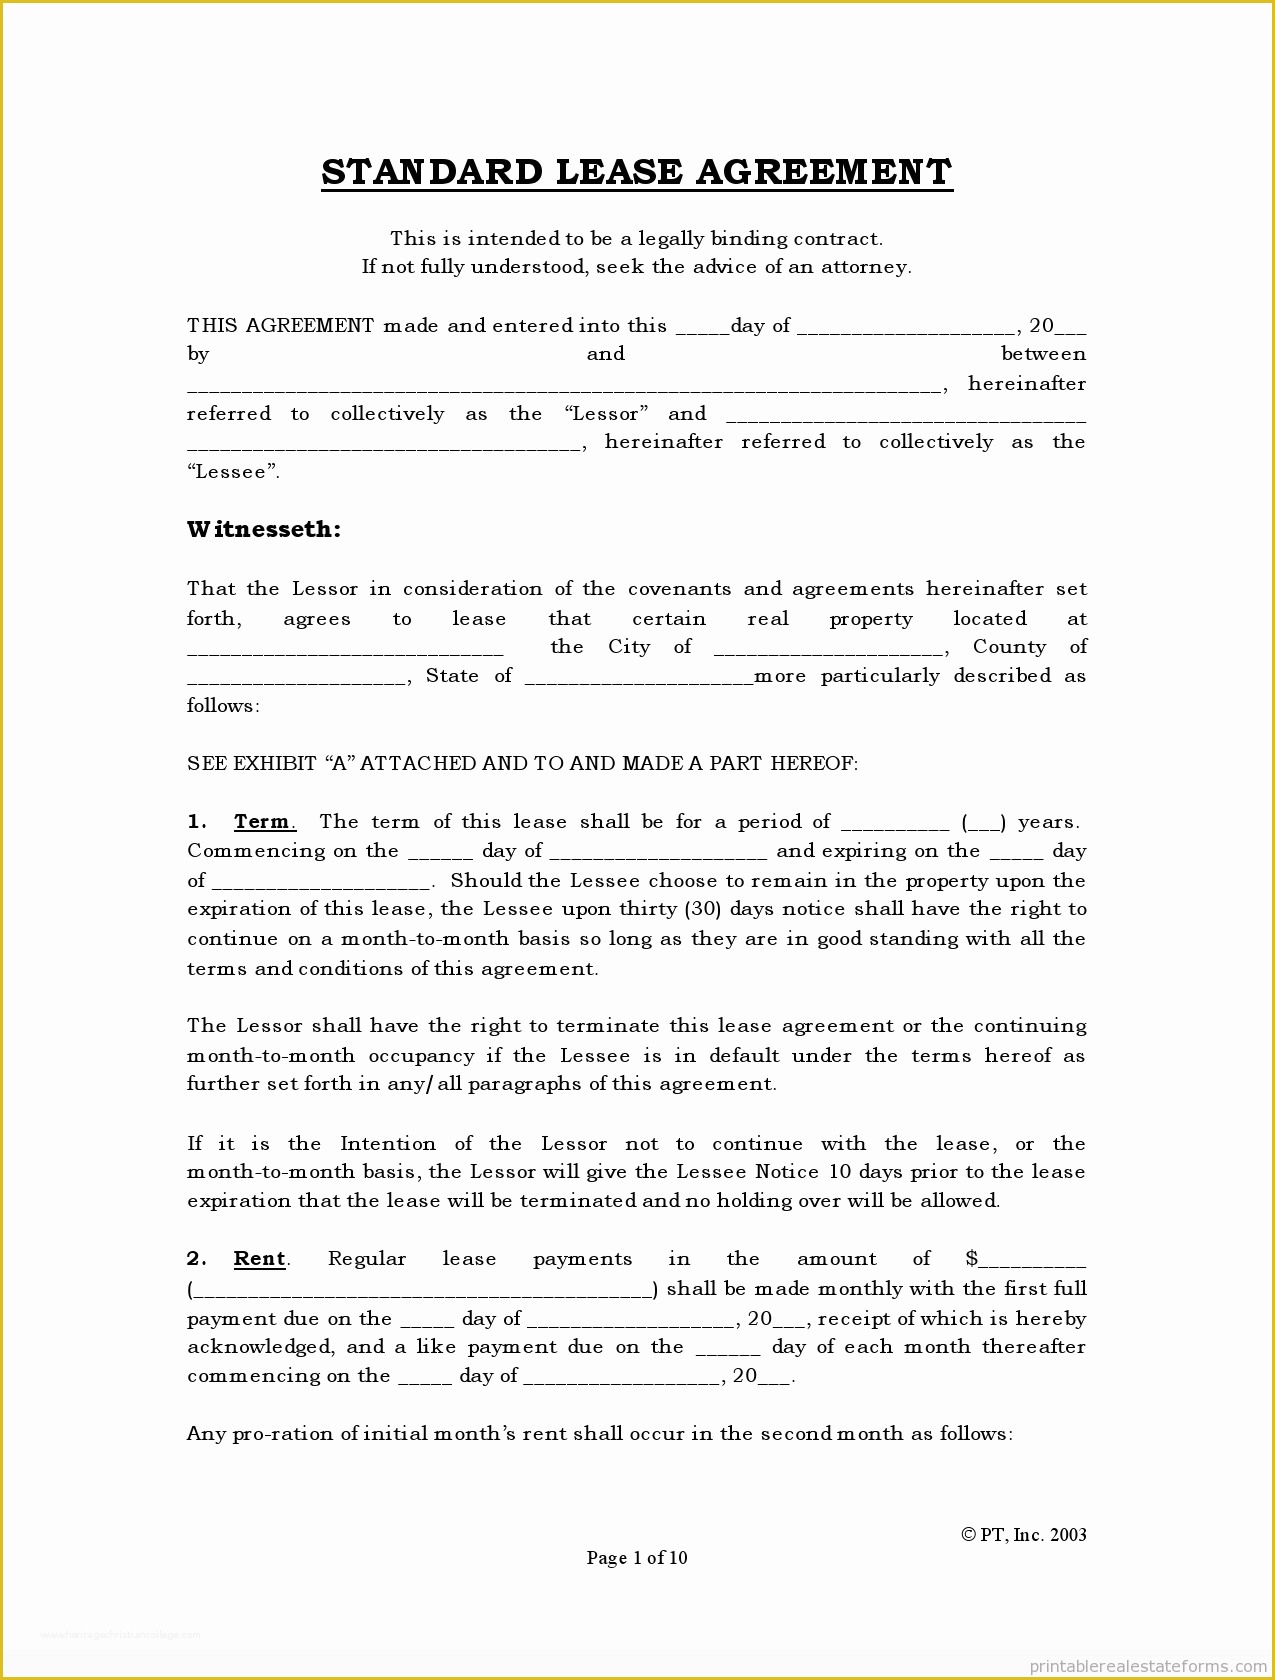 Rental Agreement Template Free Of Free Rental Agreements to Print